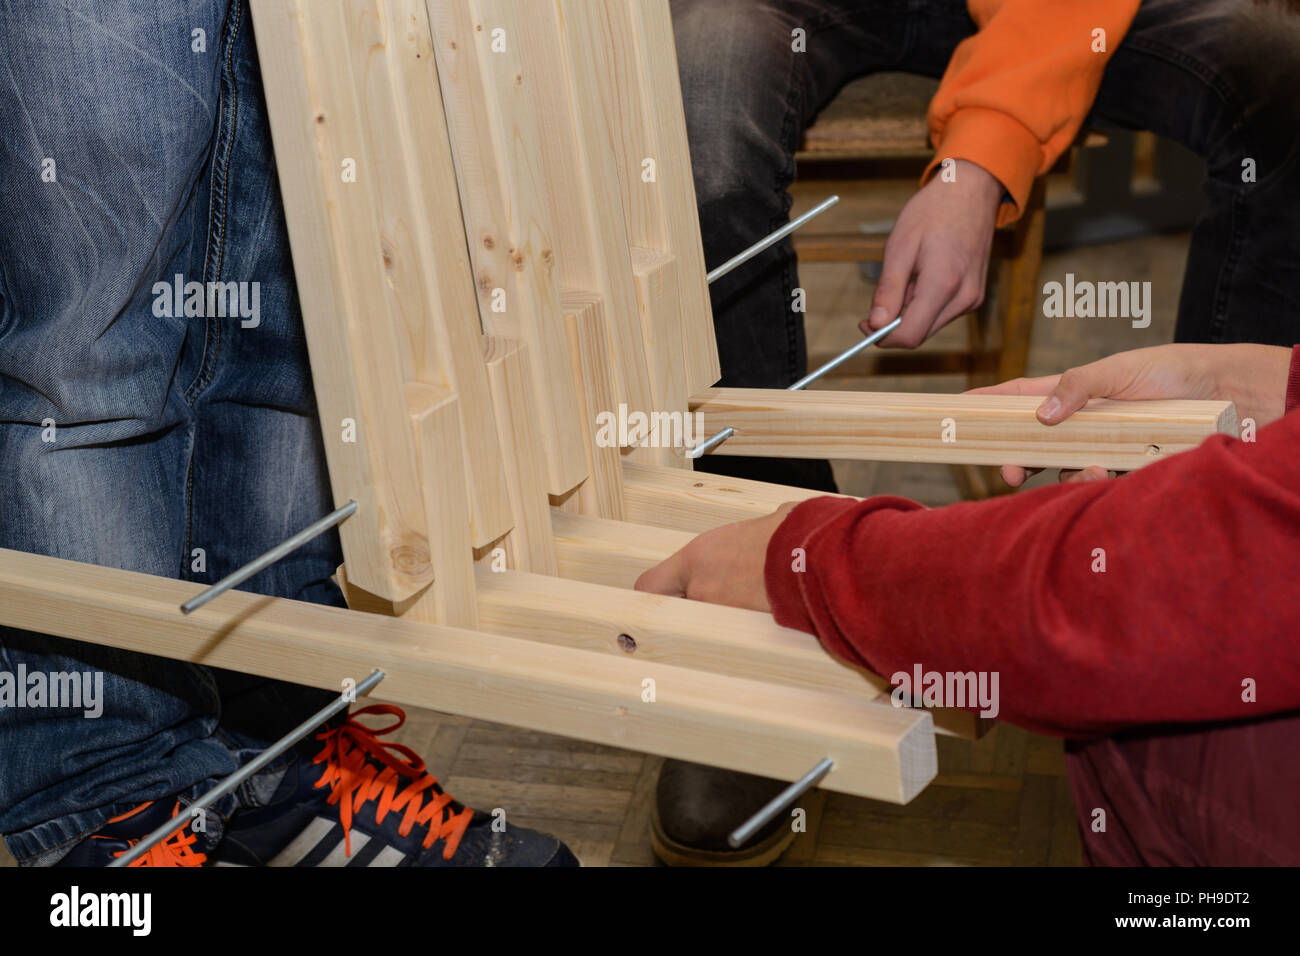 Carpentry building rustic wooden armchairs - close up wooden connections Stock Photo